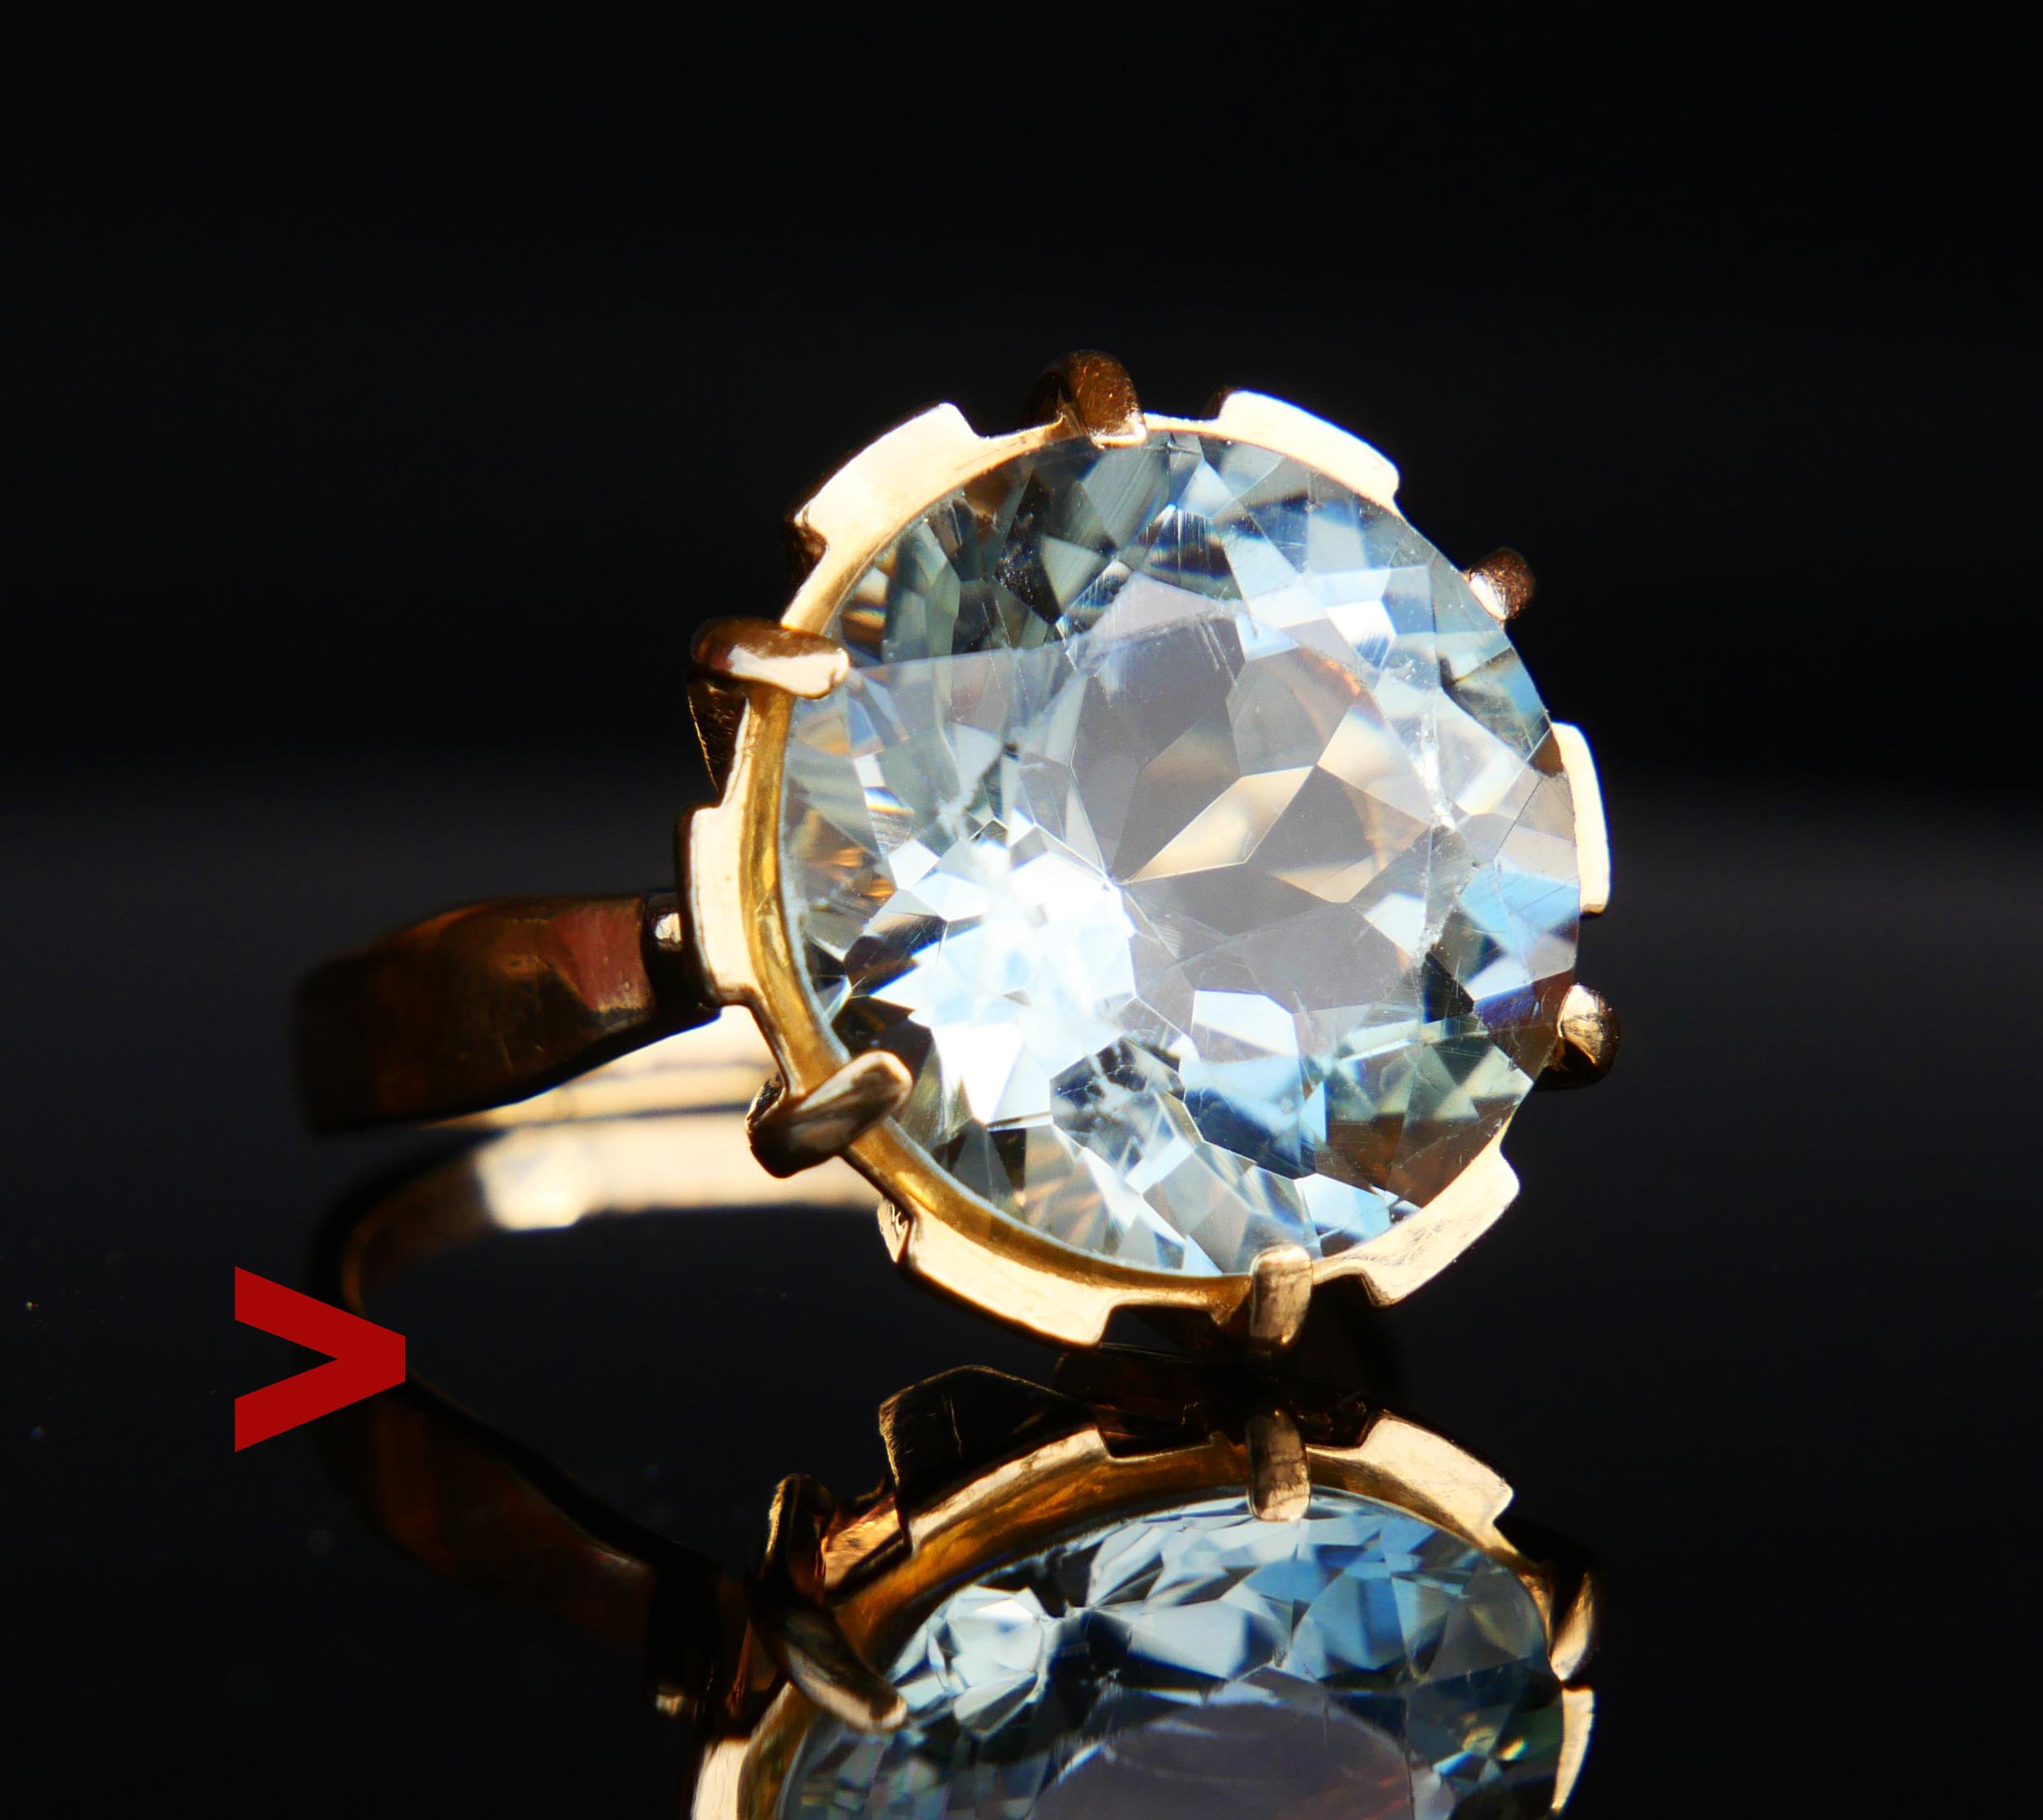 Beautiful Vintage Aquamarine Cocktail Ring for the female hand. Frame in solid 18K Yellow Gold.

Fine diamond-cut claw set natural Light Blue with a tint of Green Aquamarine measuring Ø 15 mm x 9.38 mm deep / about 13 ct.

Stone is eye-clean /